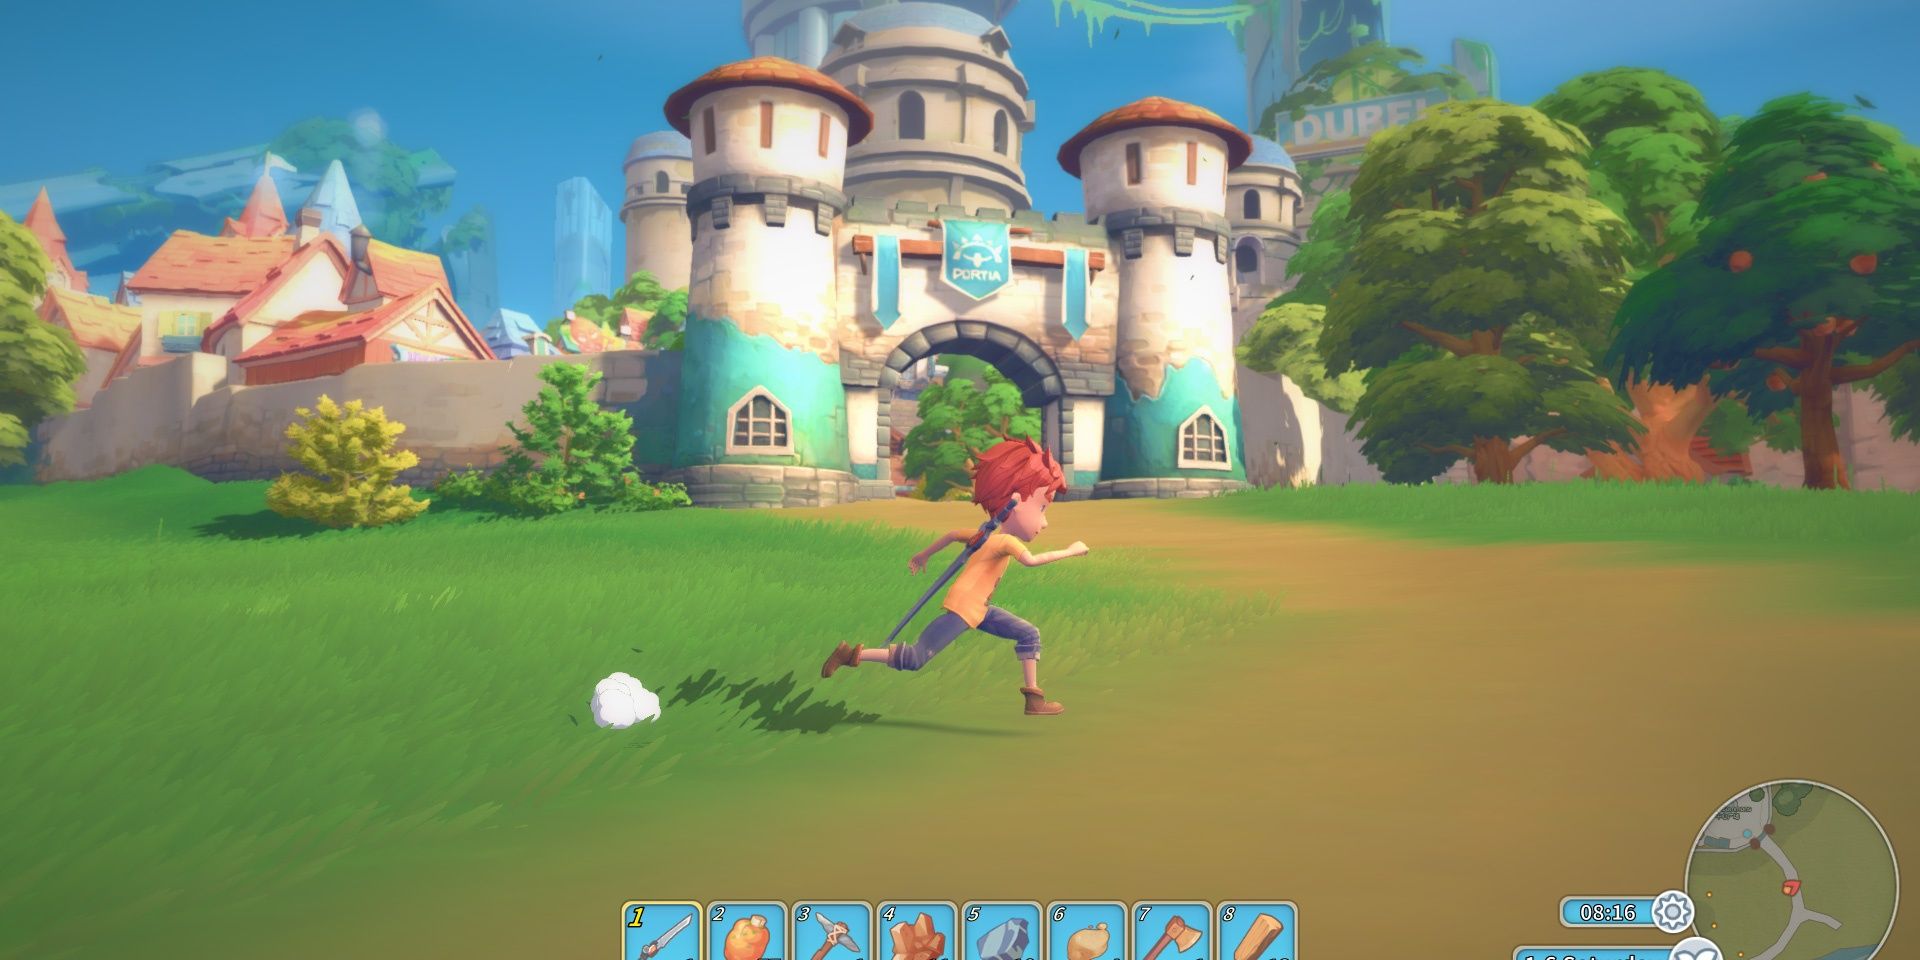 My time in Portia is ticking